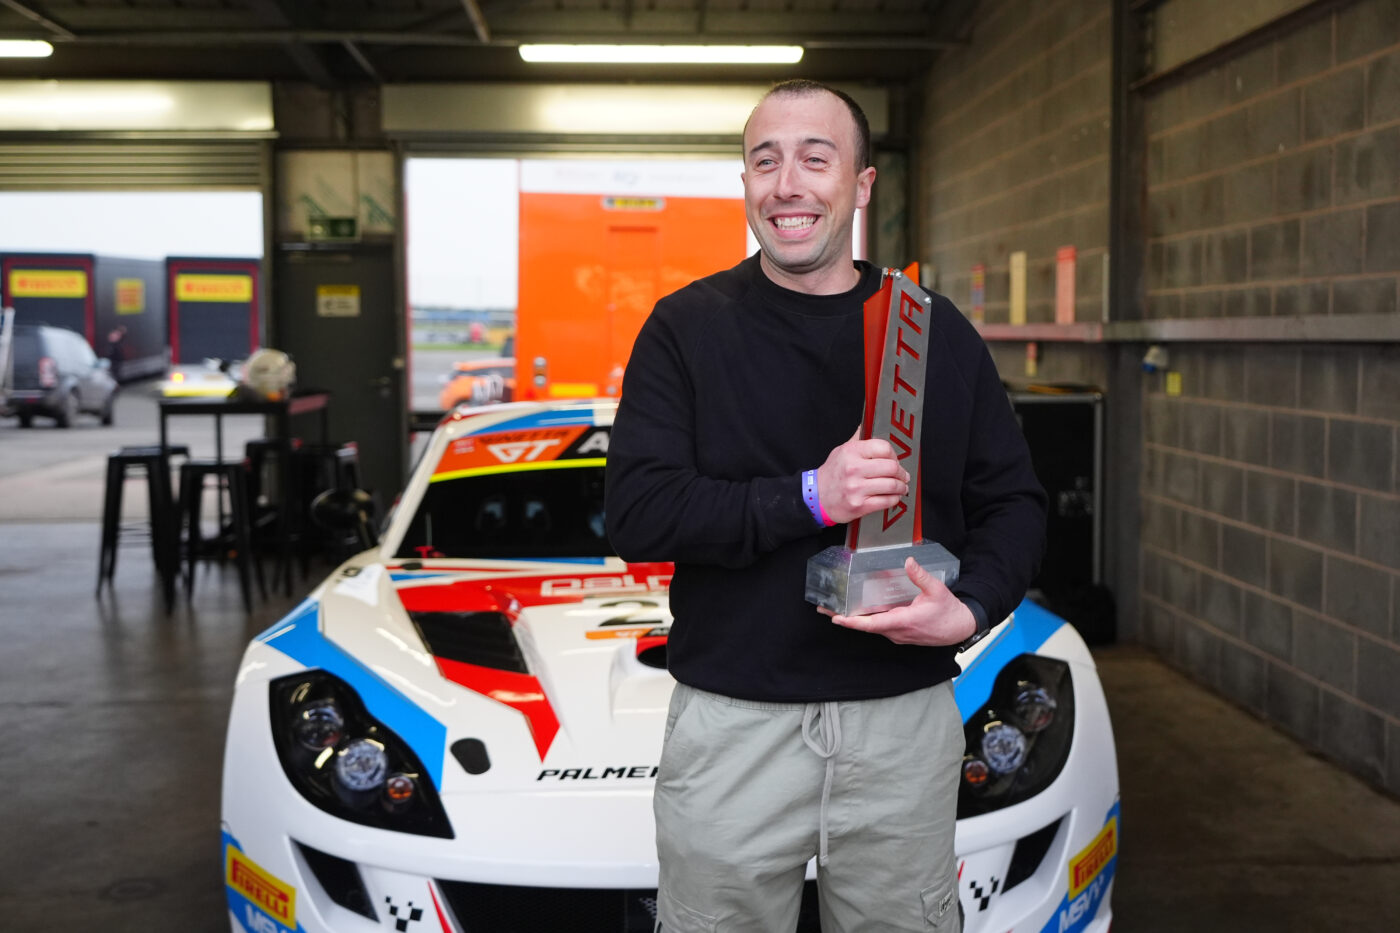 PalmerSport and Ginetta Crown Scholarship Winner With Prize Worth £100,000